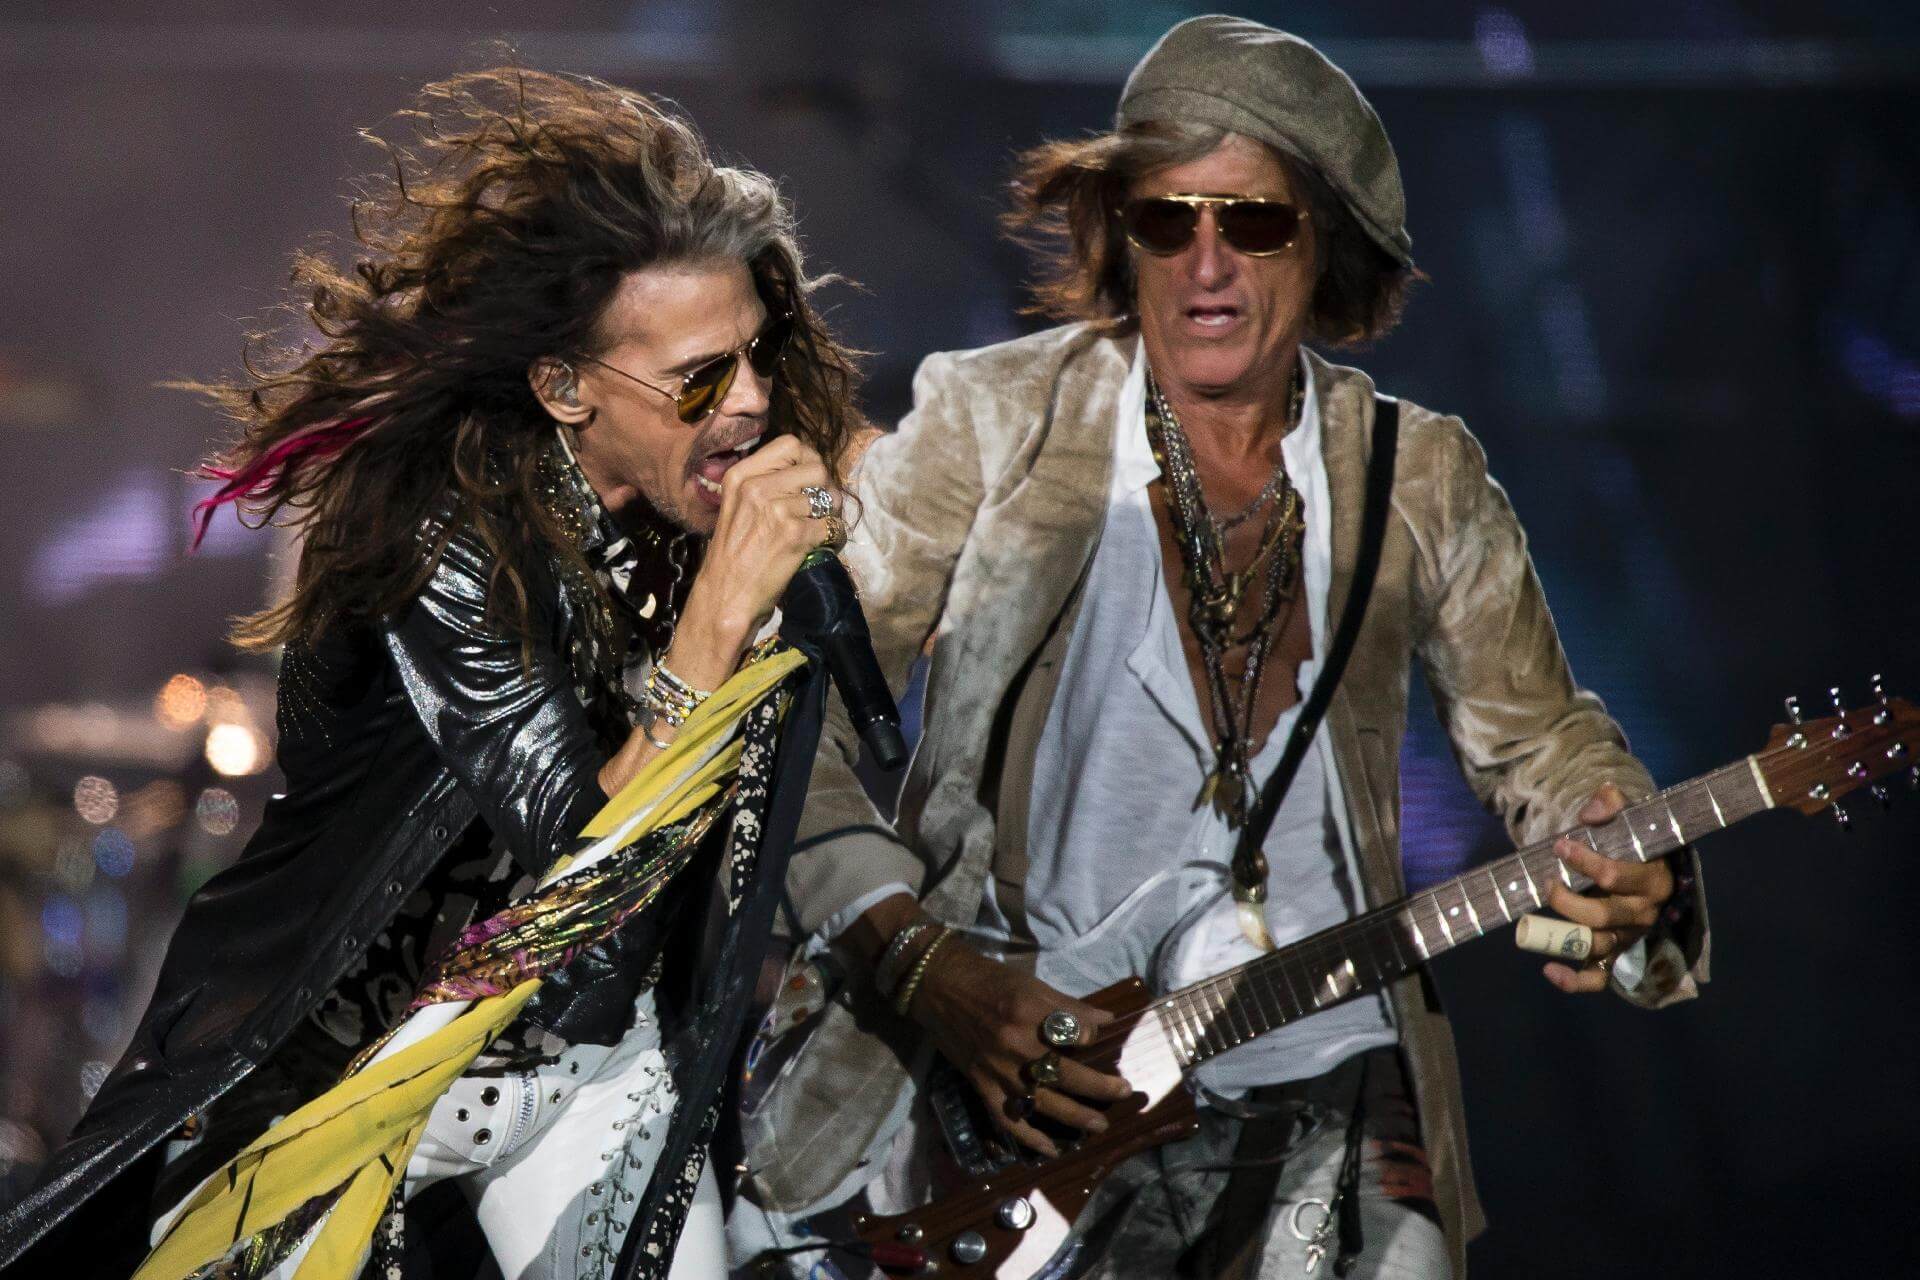 Aerosmith cancels upcoming concerts in South America due to Steven Tyler’s health